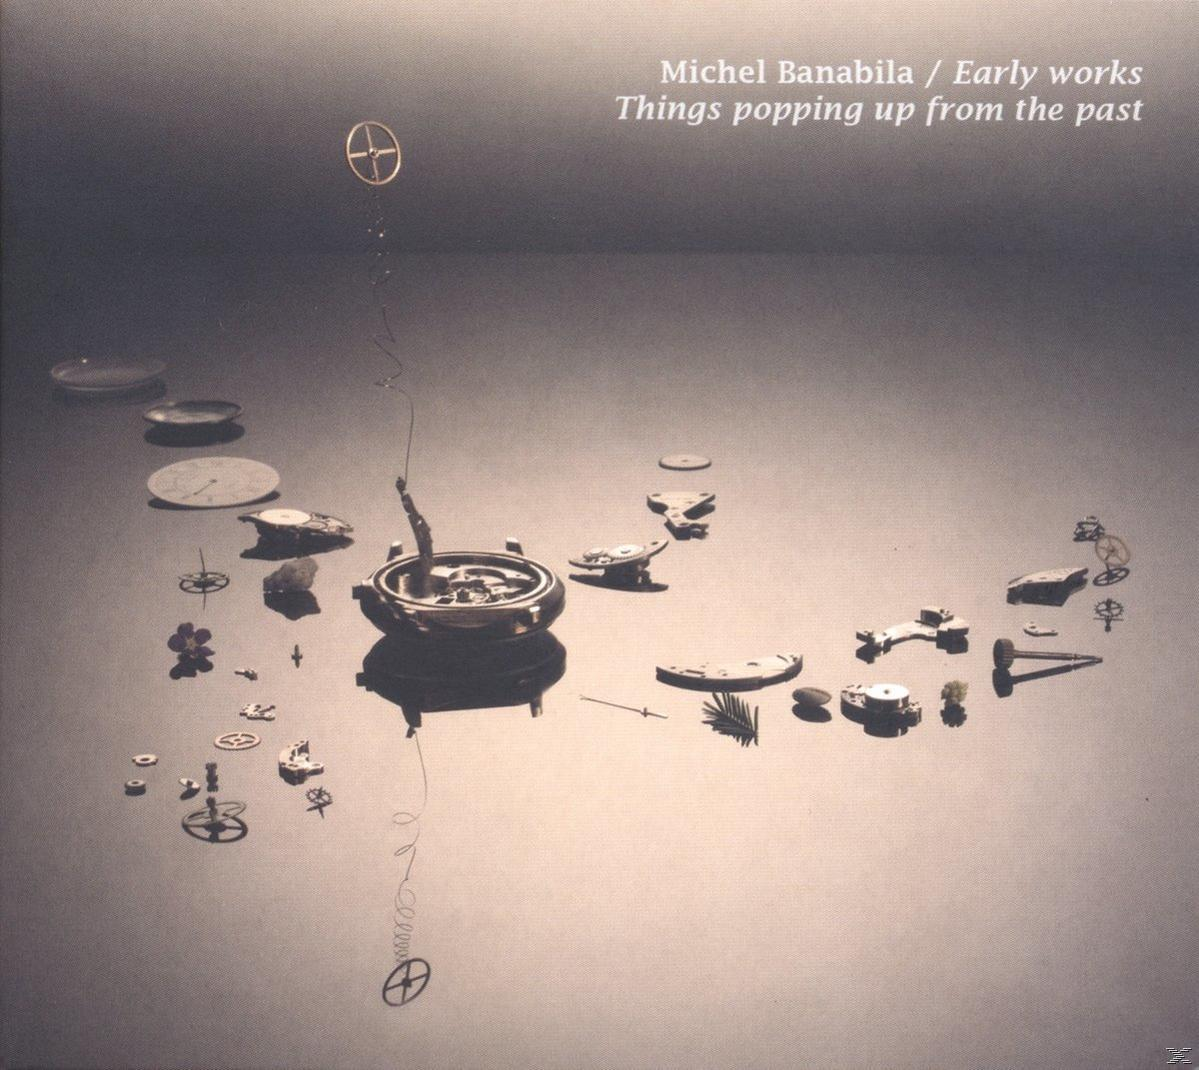 Michel Banabila - - Popping The Things Up From (CD) Past